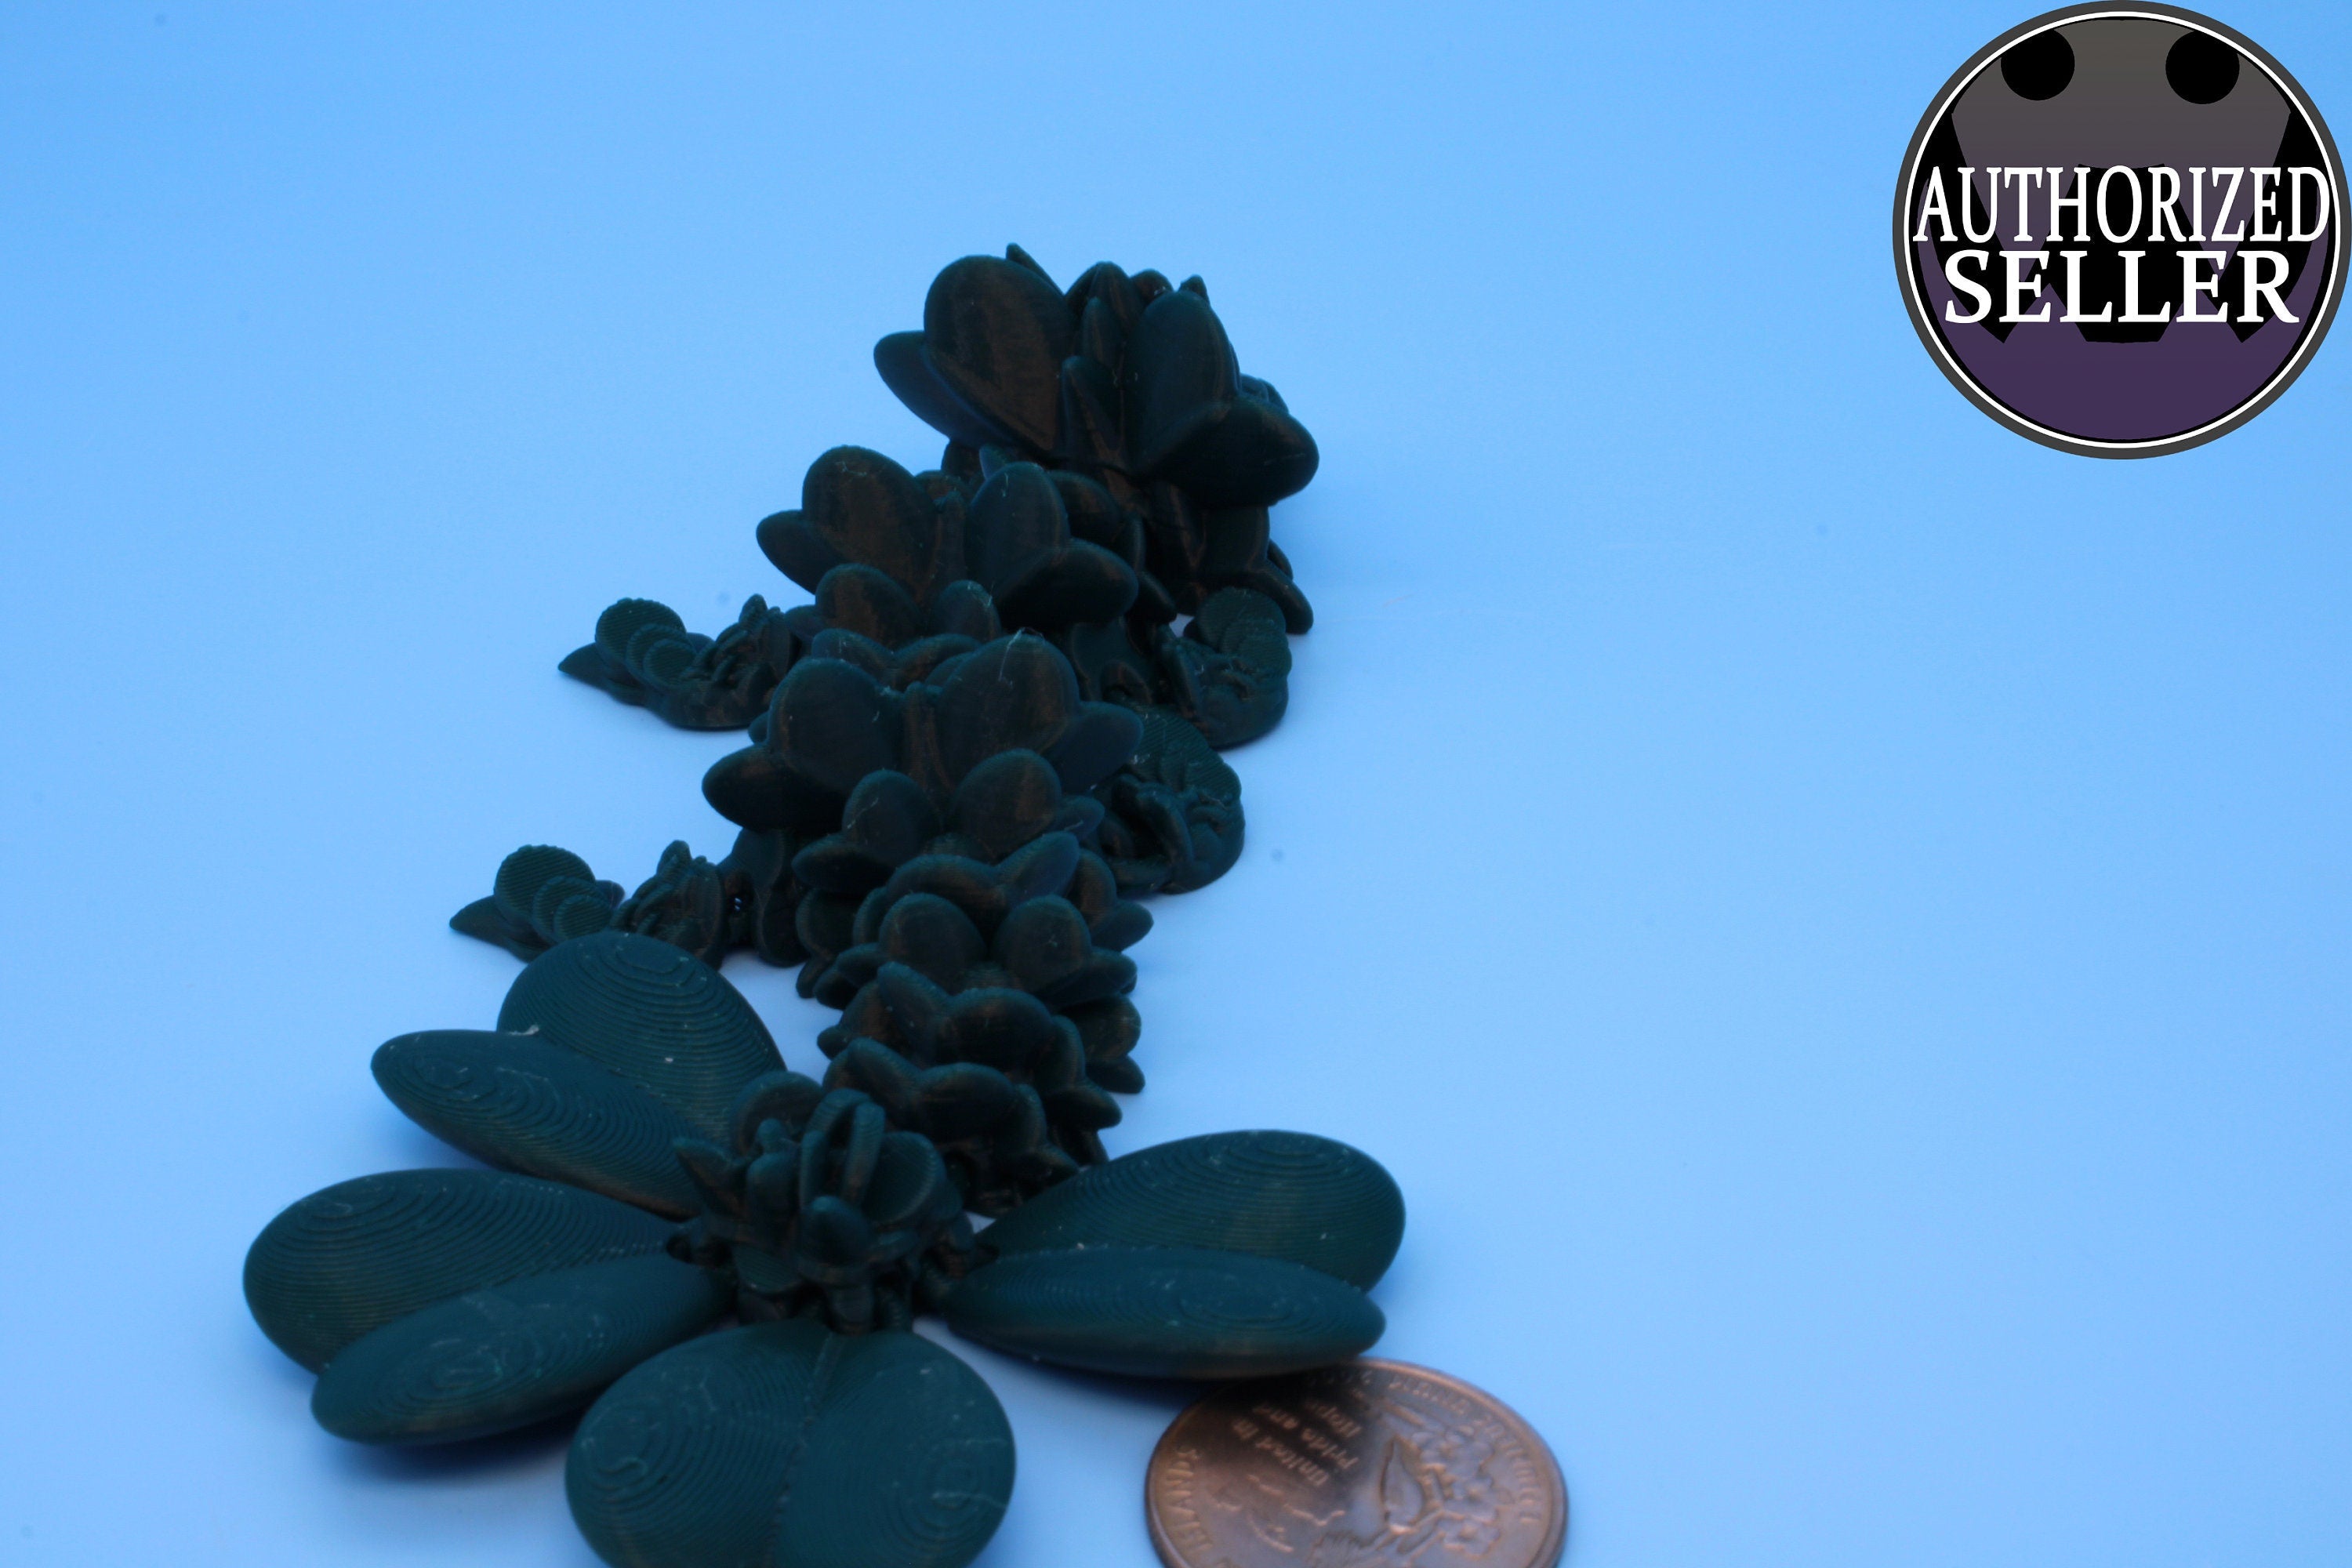 Baby Clover Dragon | 3D printed Articulating Dragon Fidget Toy | Flexi | 6 in Lucky Dragon | 4 Leaf Clover